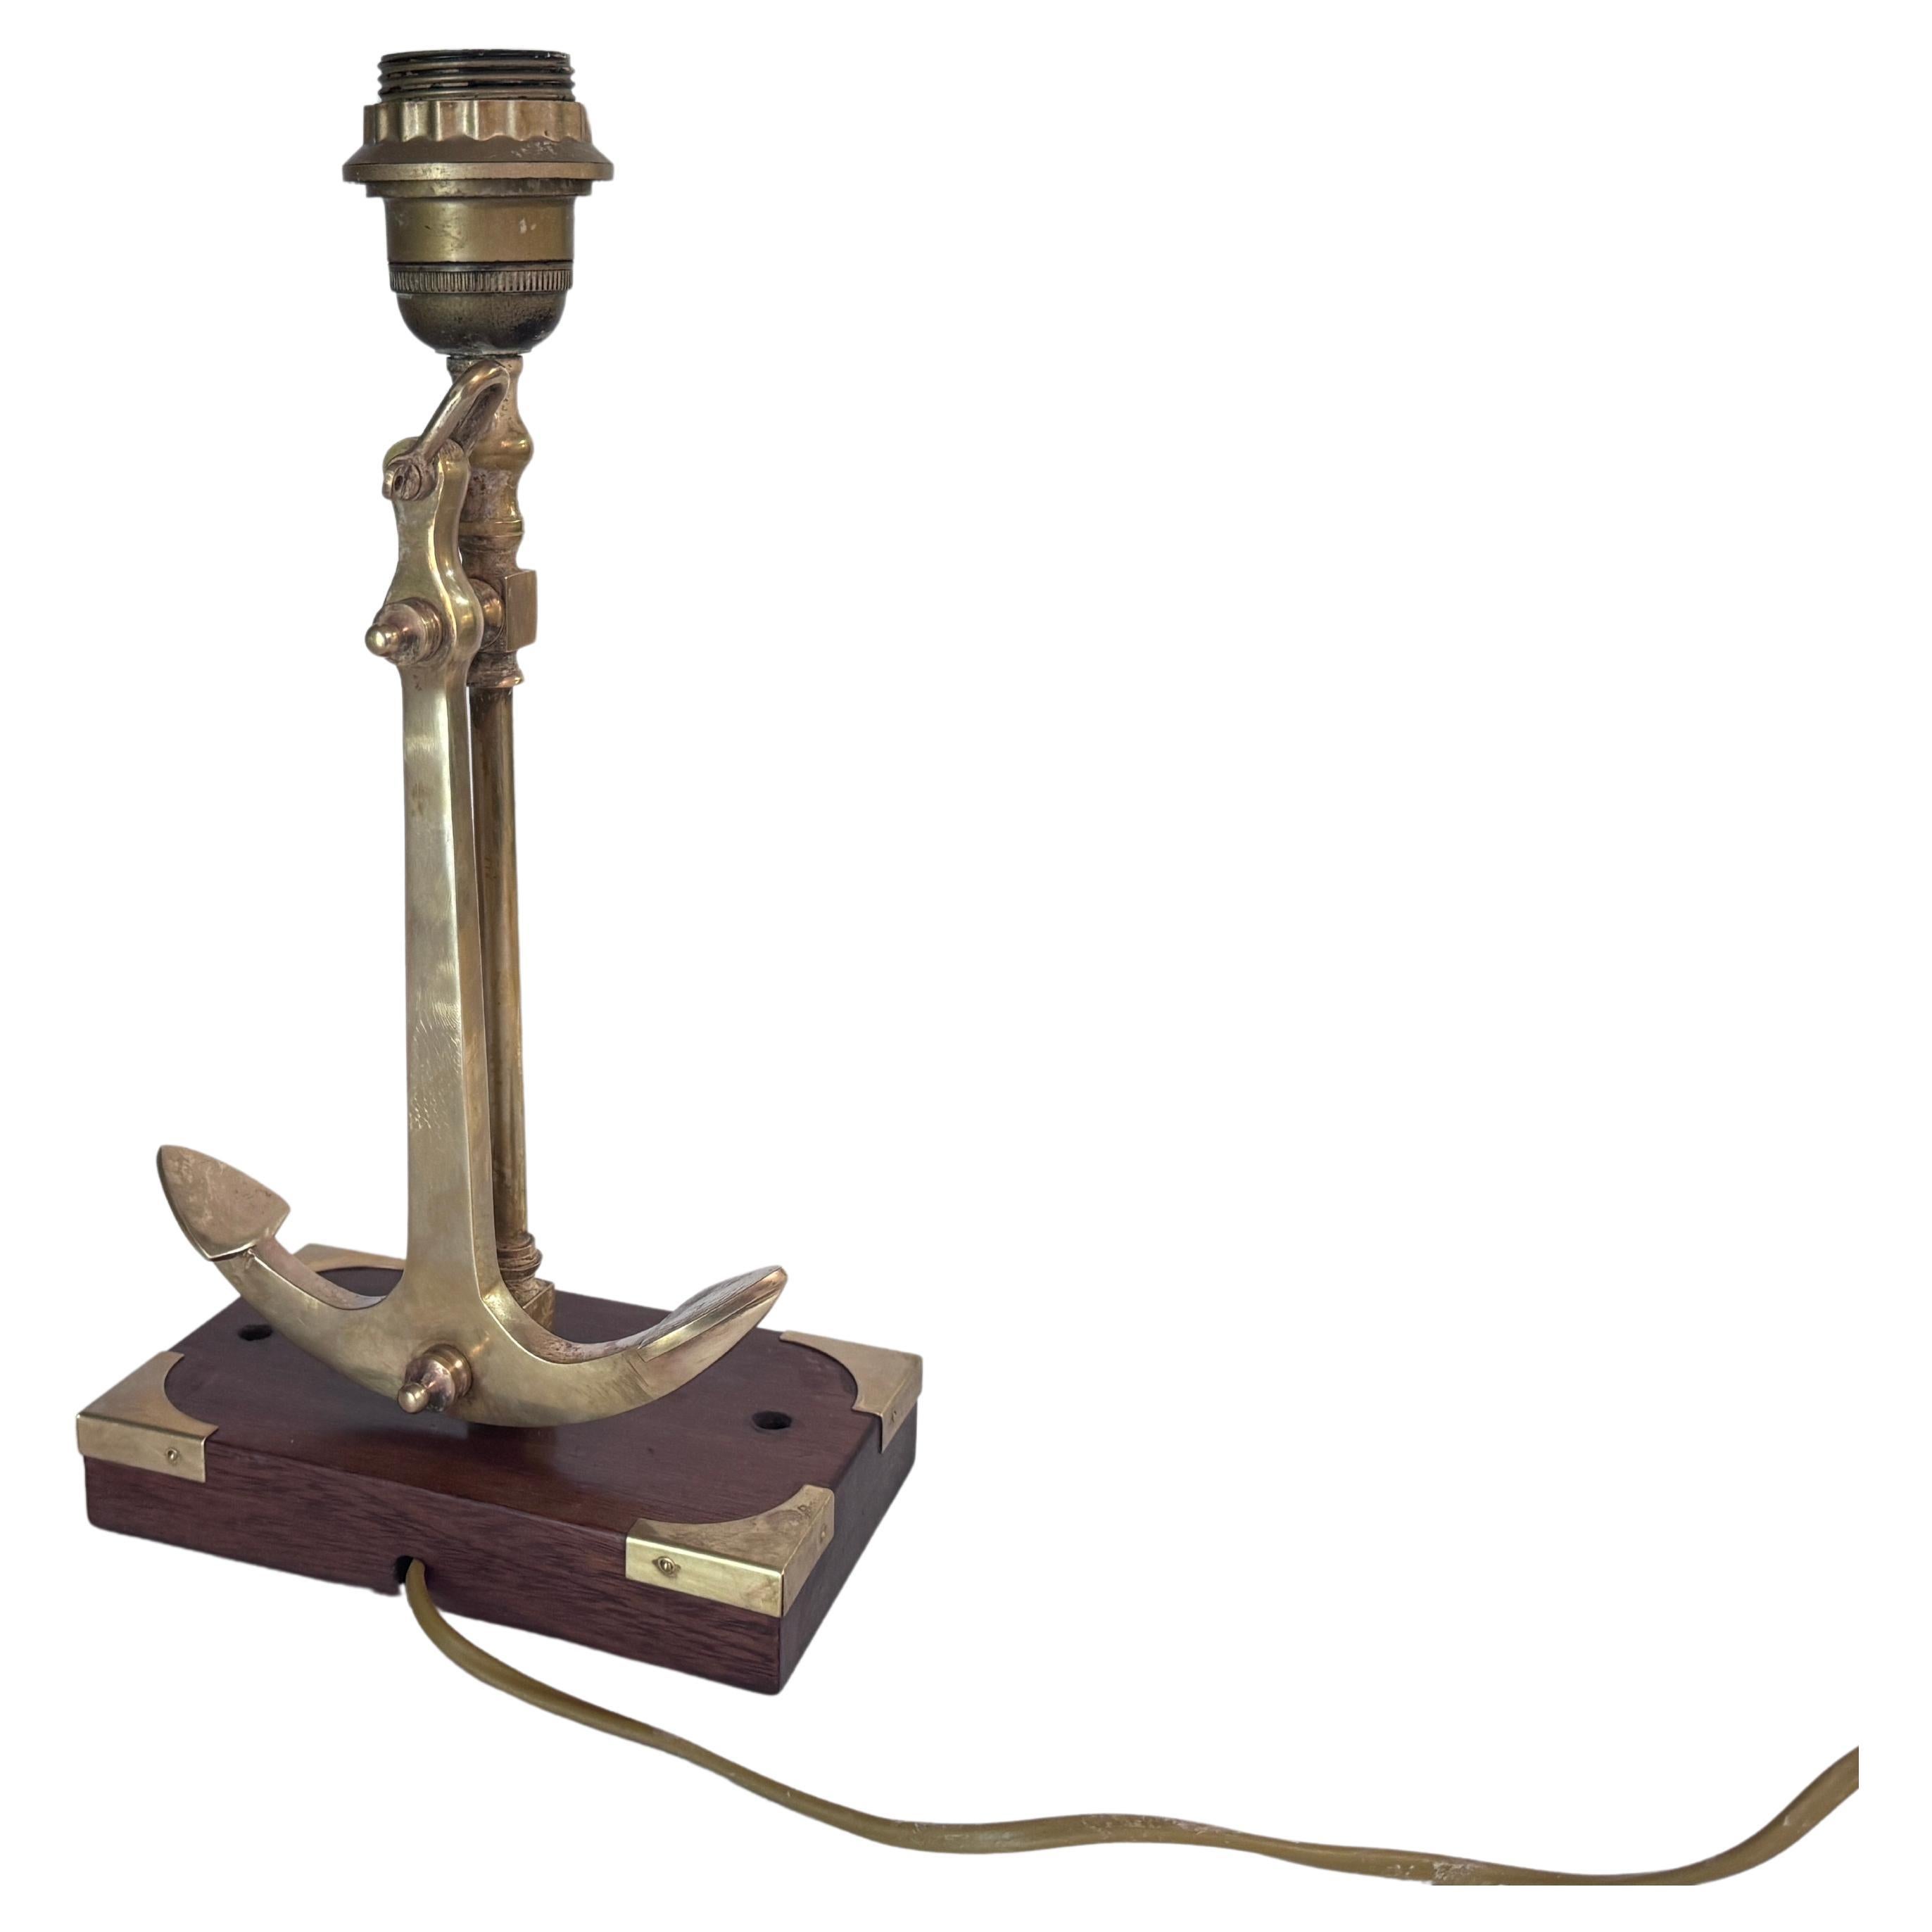 This lamp is a beautiful Marine style lamp, it is made of Brass and Wood. It was made in the 1960s in France, and is in good condition, its electrification is compatible with the United States.

US PLUG ADAPTATOR WILL BE FURNISHED FOR FREE TO THE US